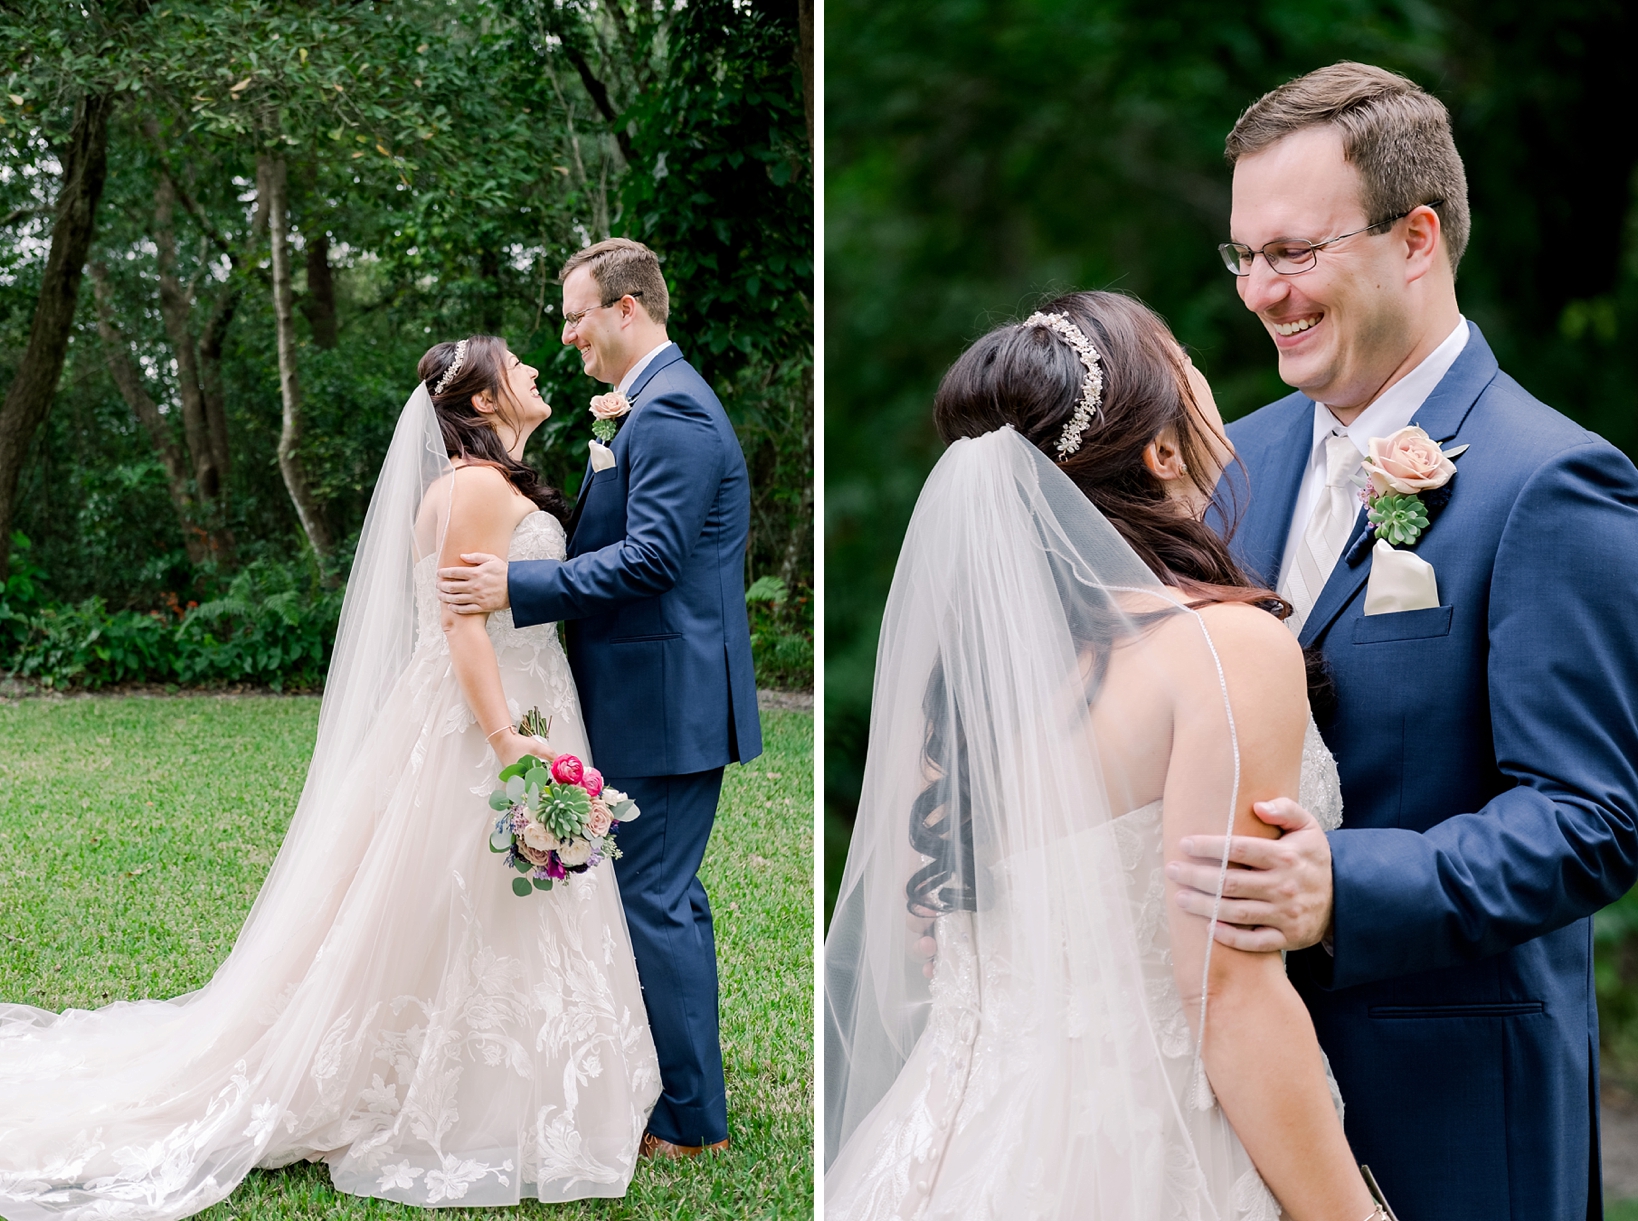 Bride and Groom share a smile and laughter during their first look in rural Tampa, FL